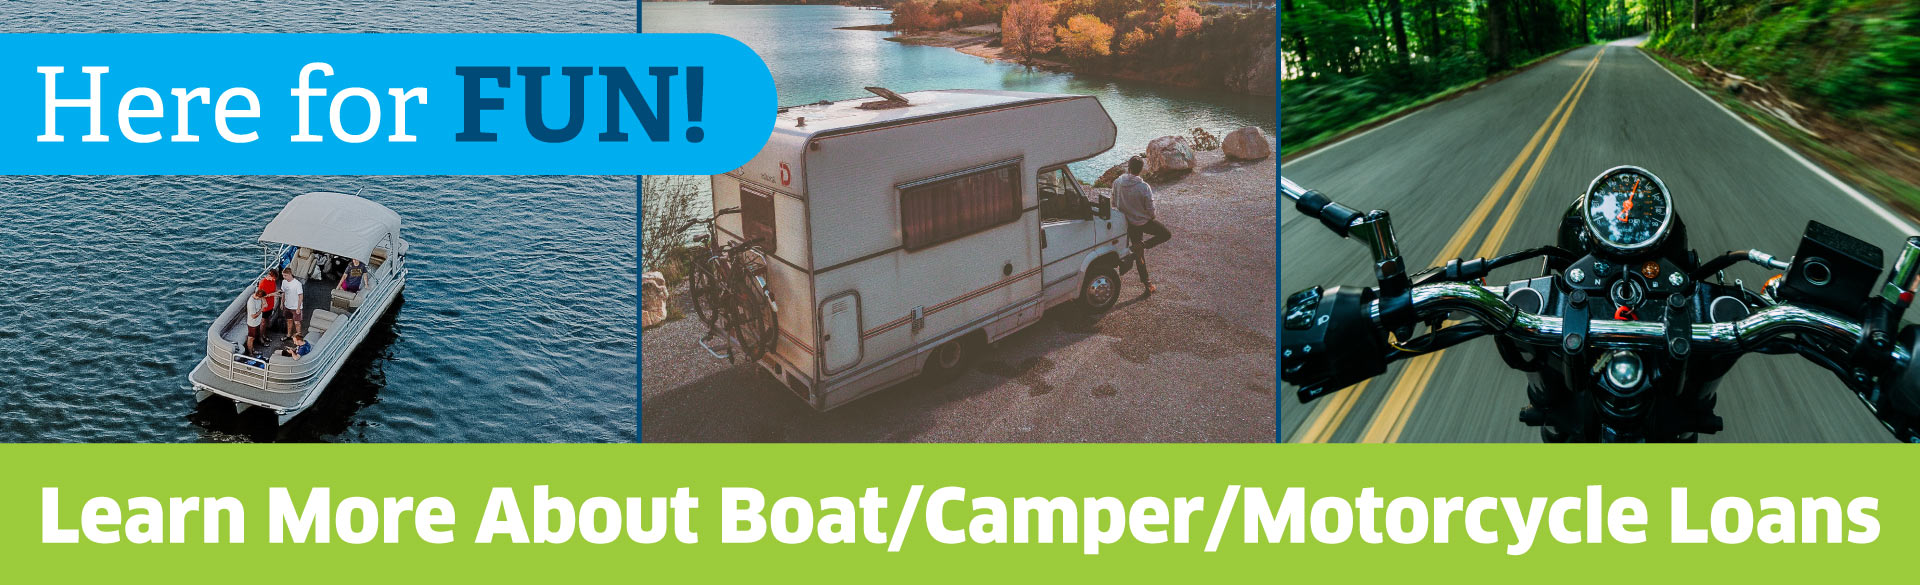 Boats Campers and Motorcycle Loans